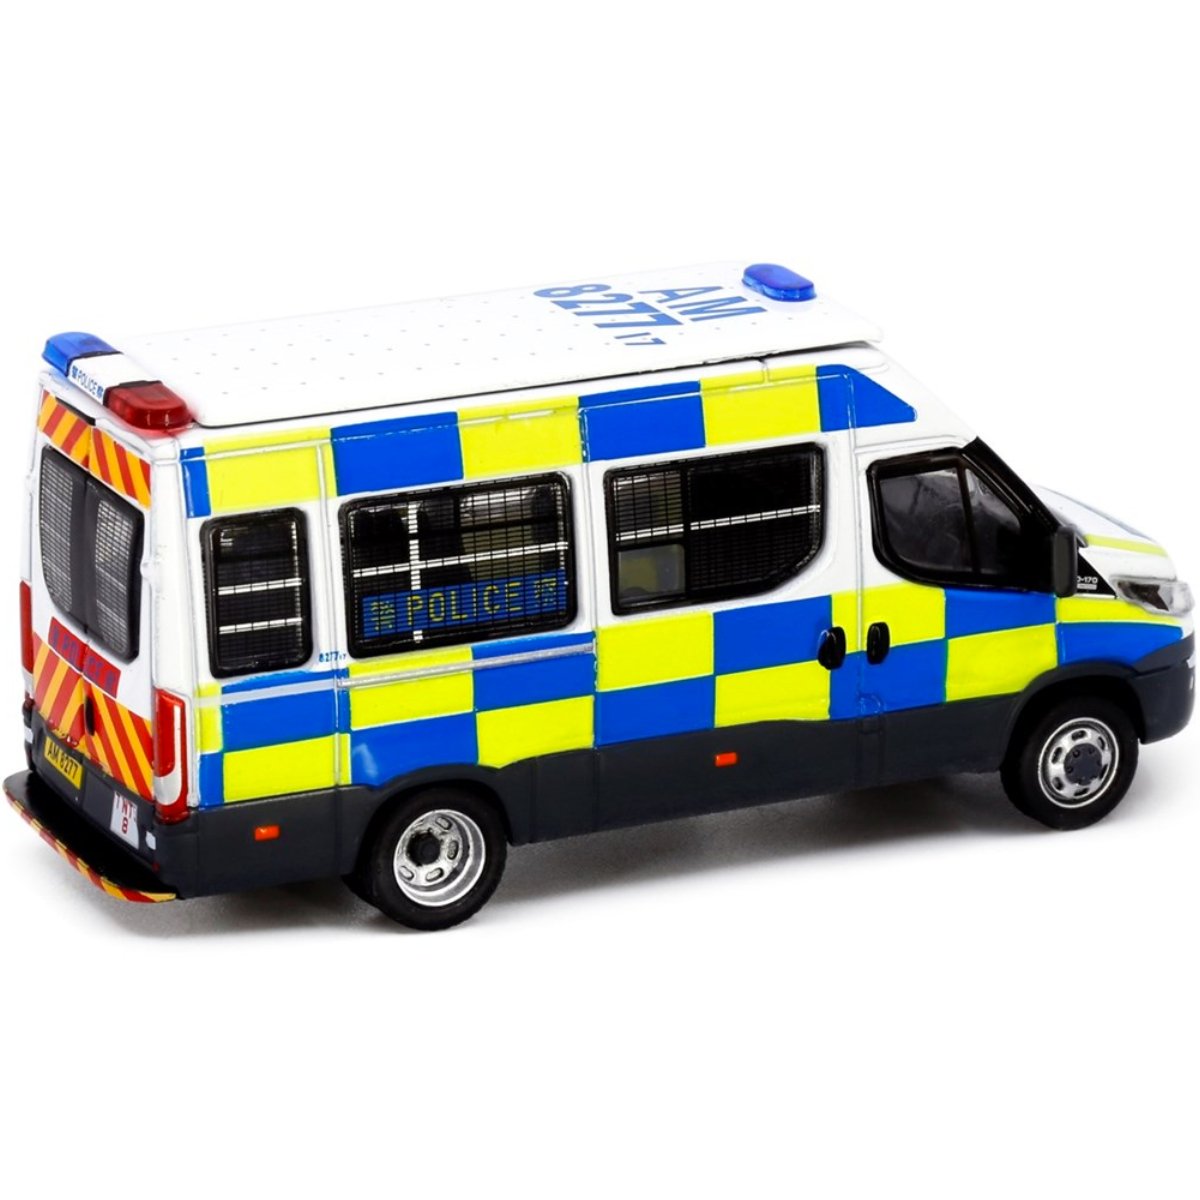 Tiny Models Iveco Daily Police Traffic Van AM8277 (1:76 Scale) - Phillips Hobbies